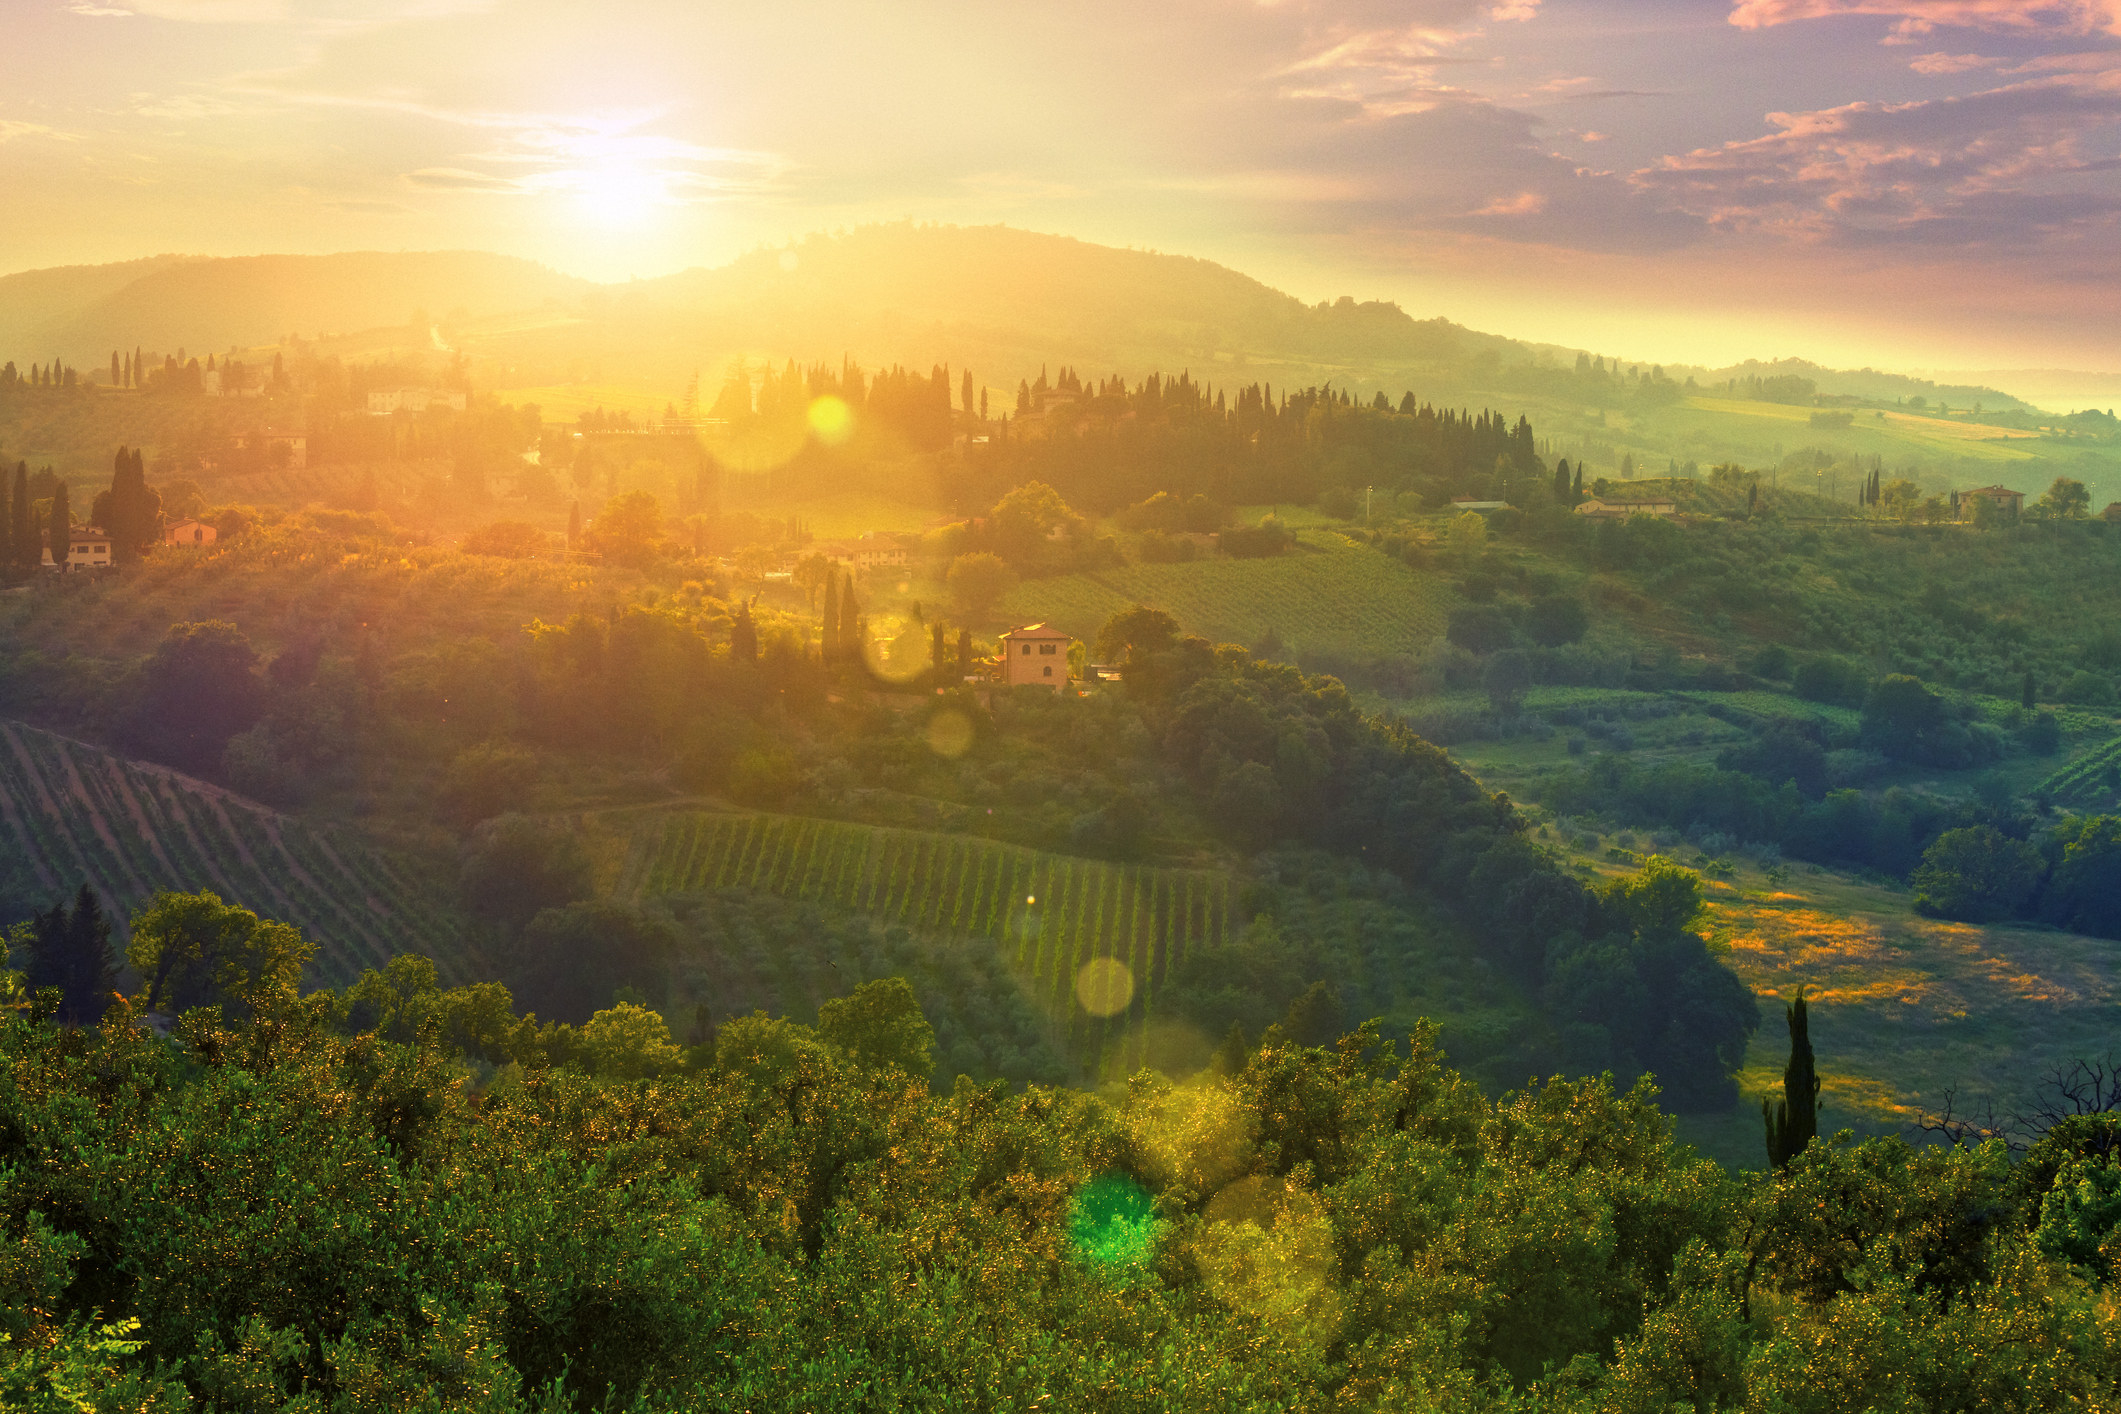 Landscape in Tuscany, Italy at sunset.